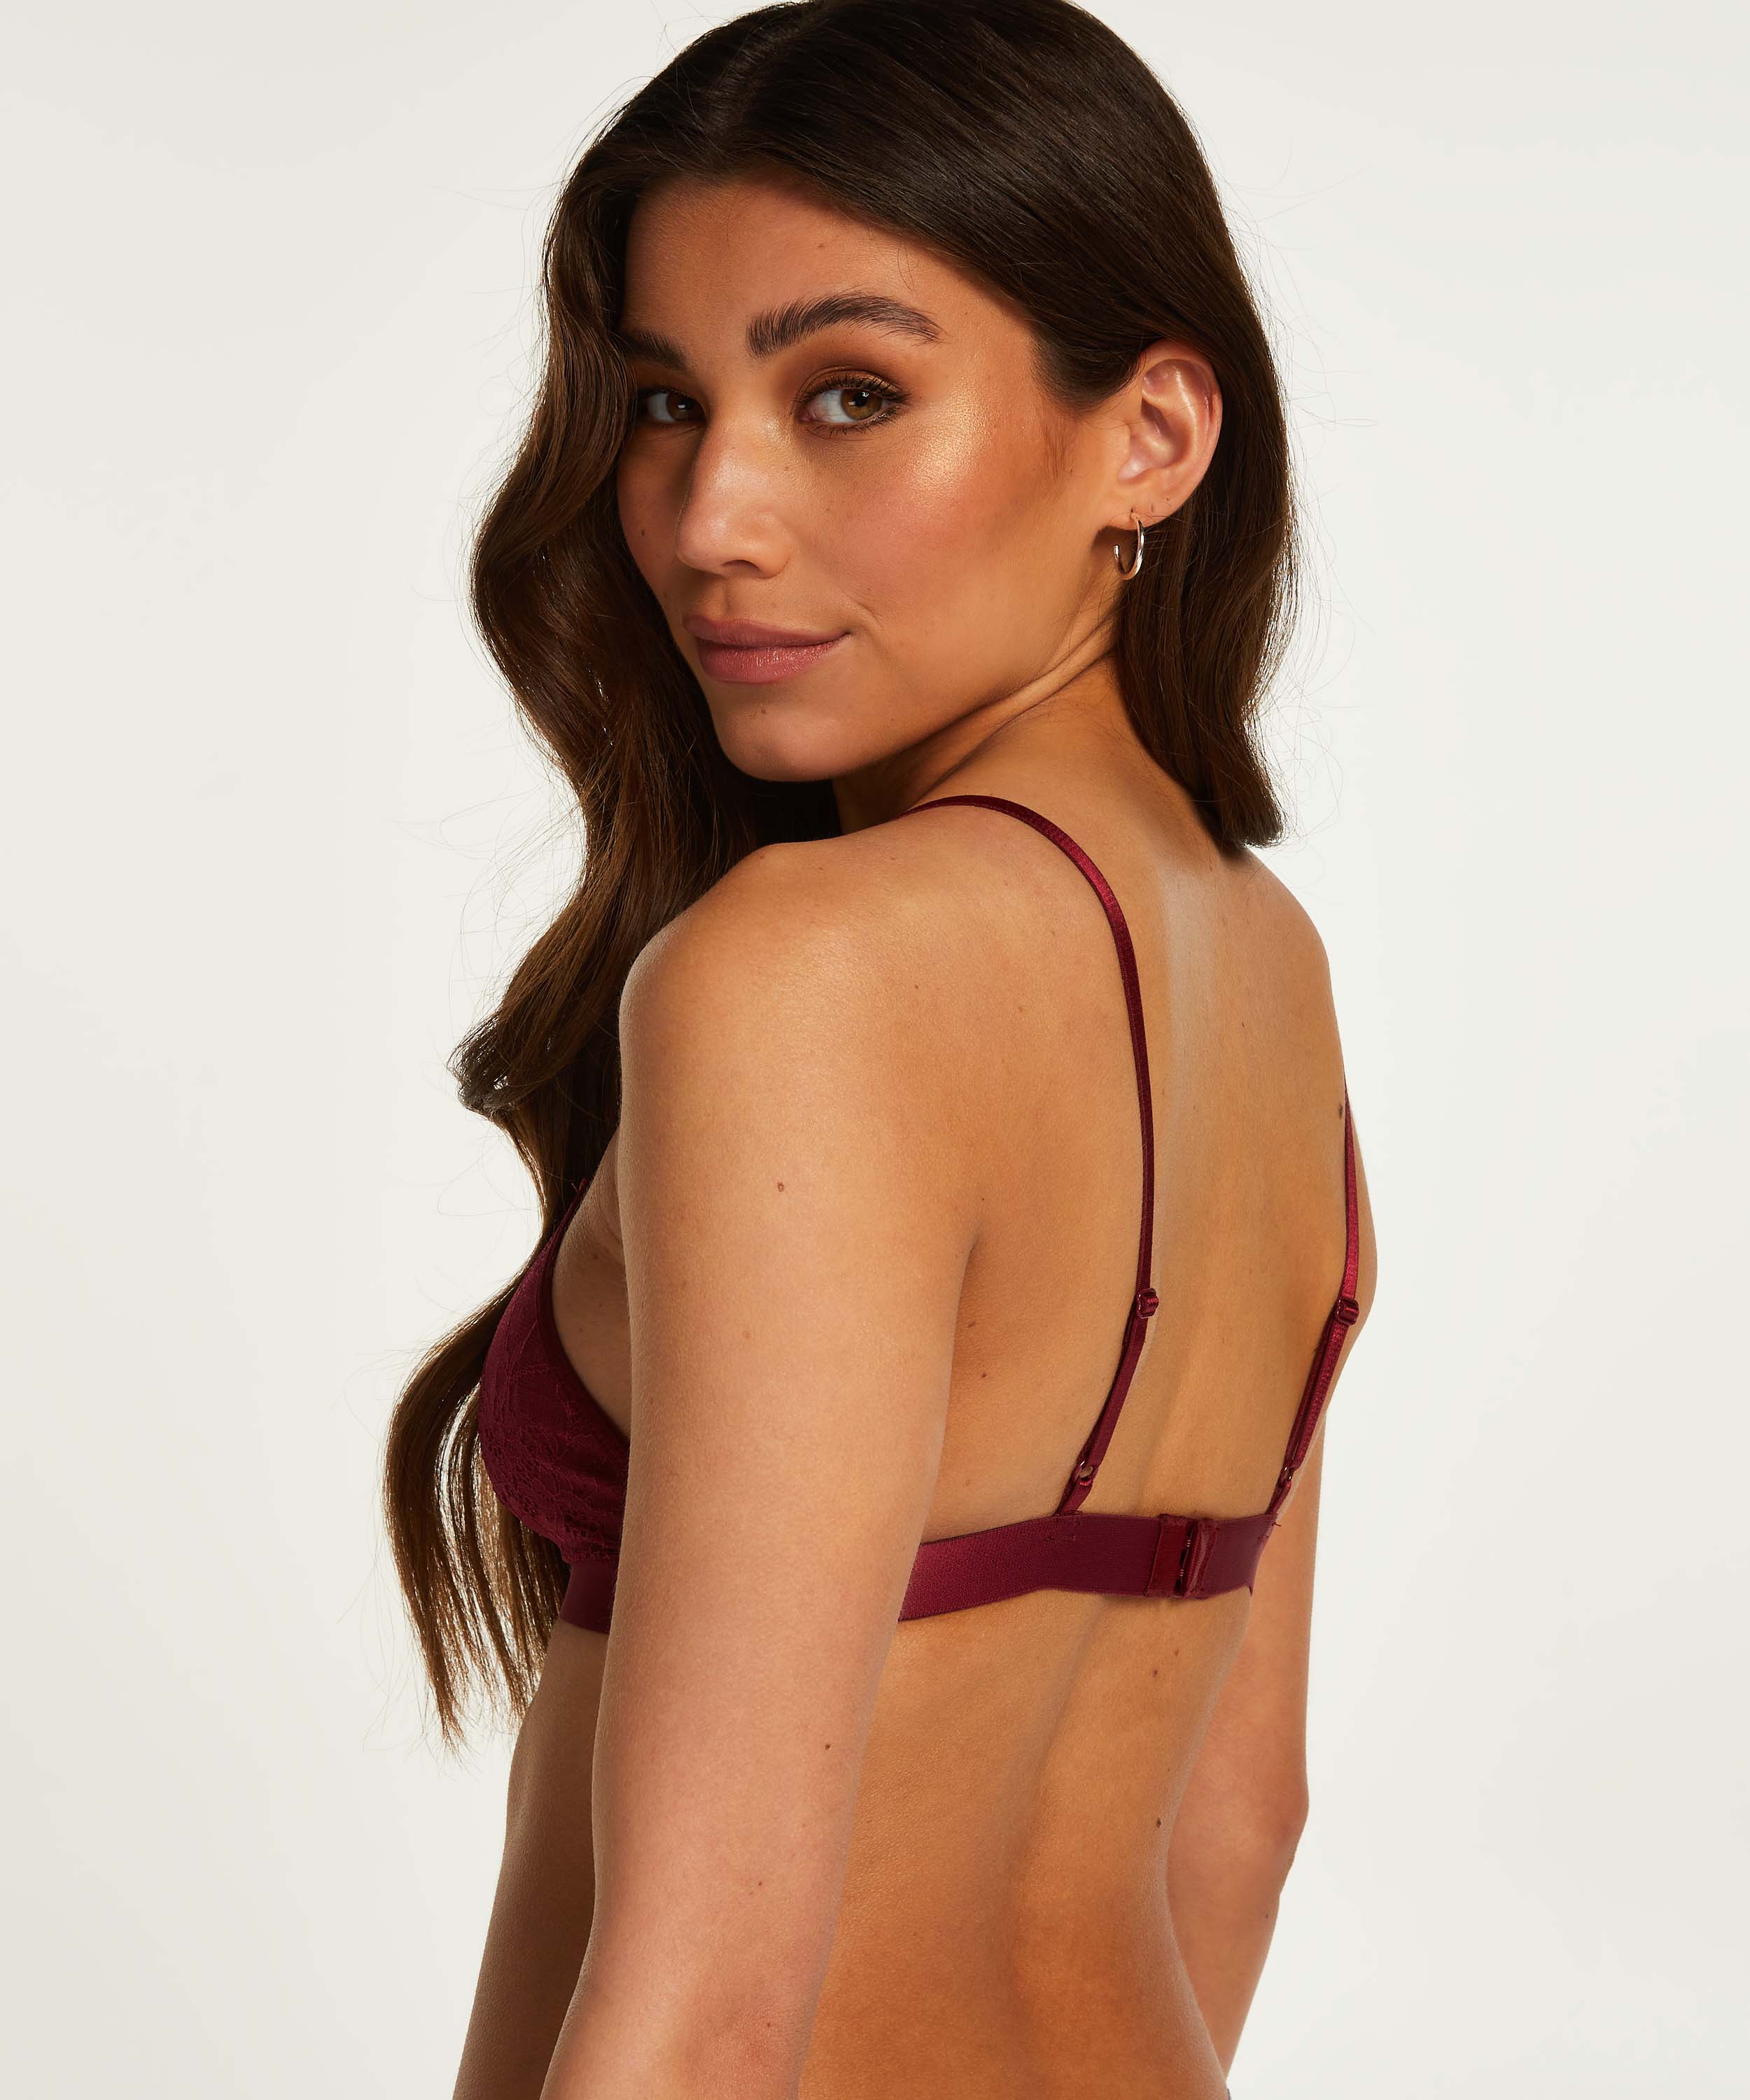 Bralette Corby, Rouge, main